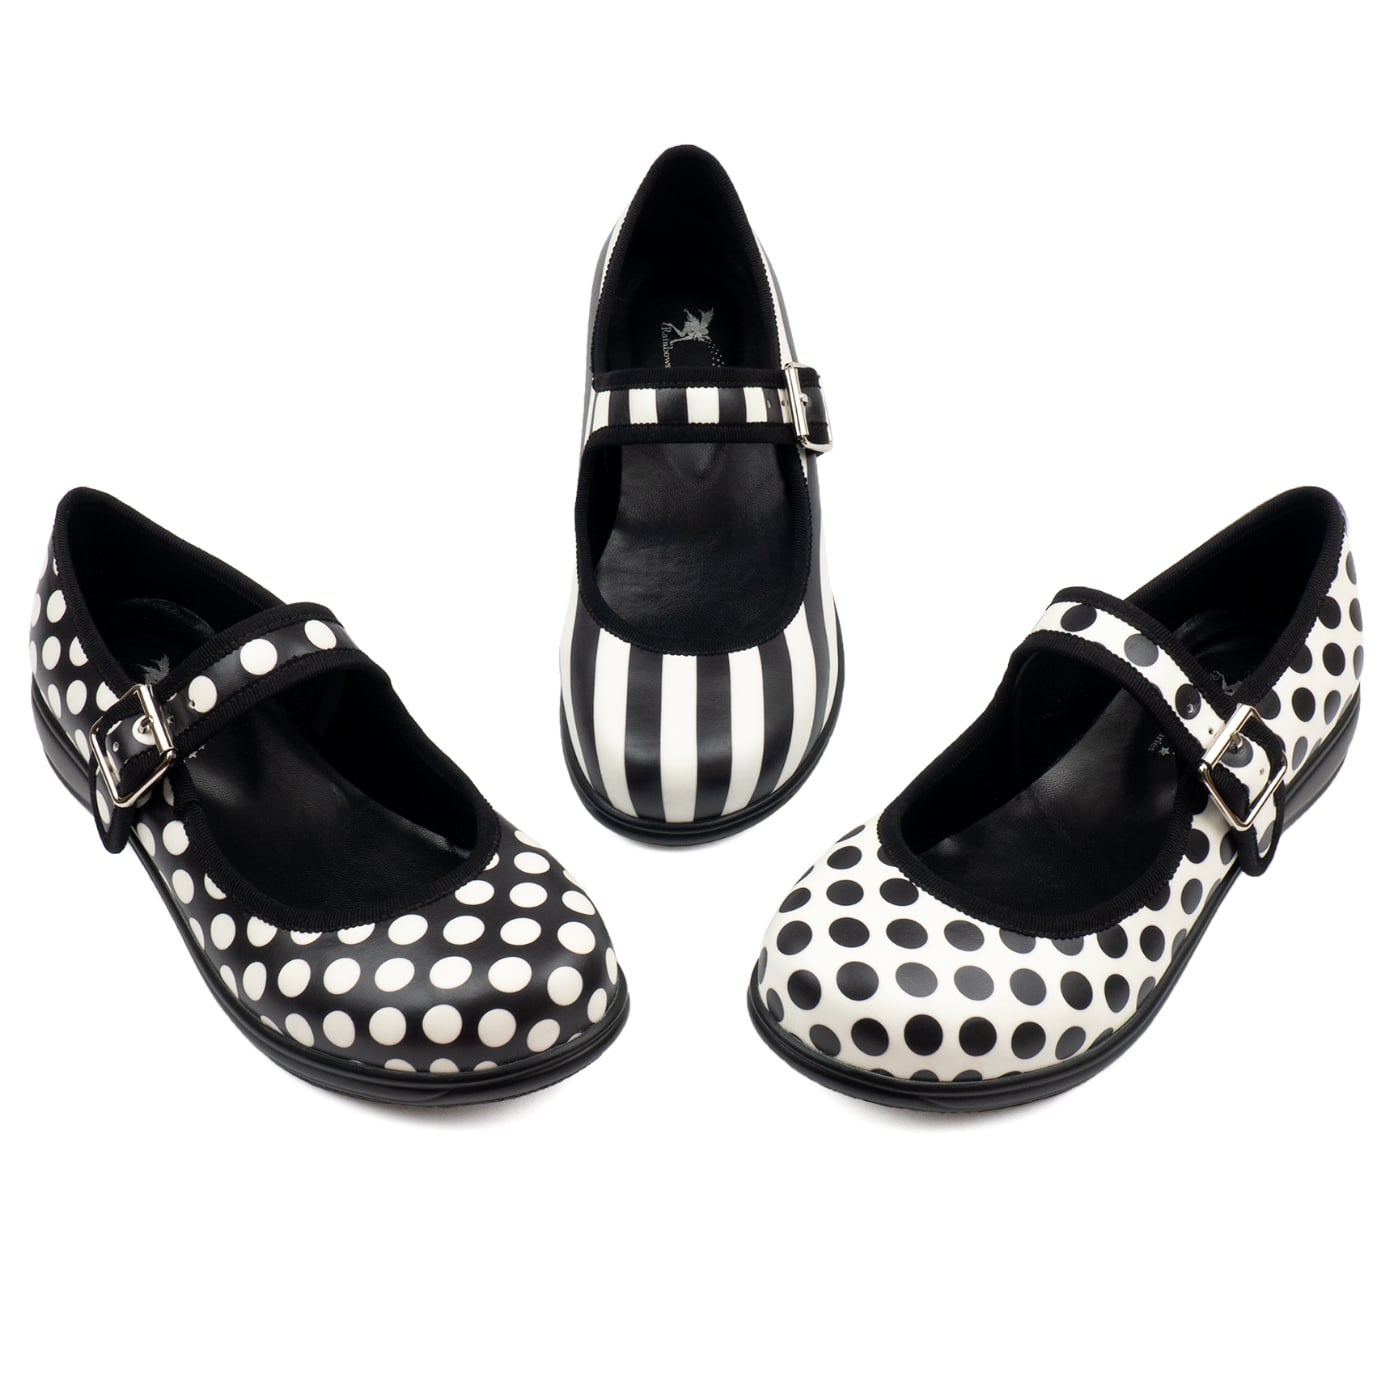 Monochrome Mary Janes by RainbowsAndFairies.com (Black & White - Polka Dots - Stripes - Mismatched Shoes - Shoes - Pair & A Spare) - SKU: FW_MARYJ_MONOC_ORG - Pic 02